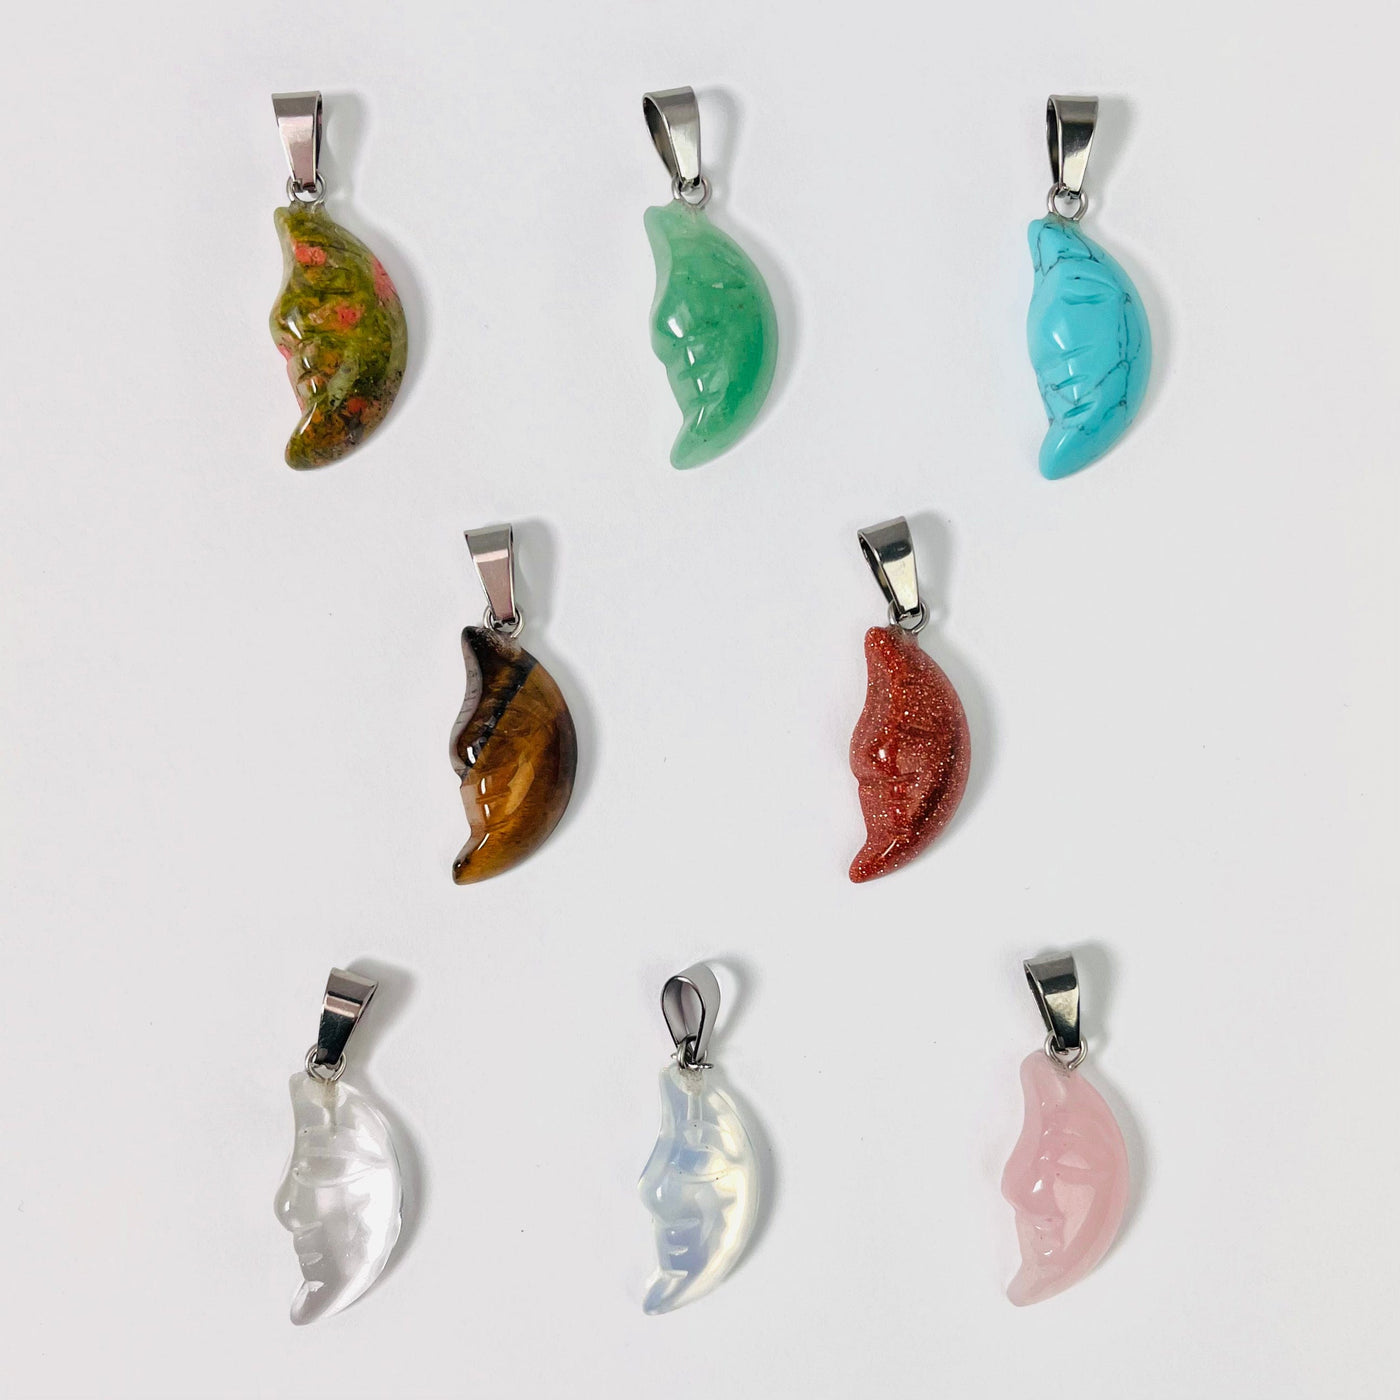 Eight Crescent Moon Gemstone Pendants set up in 3 lines; one of each stone displayed on a white surface.